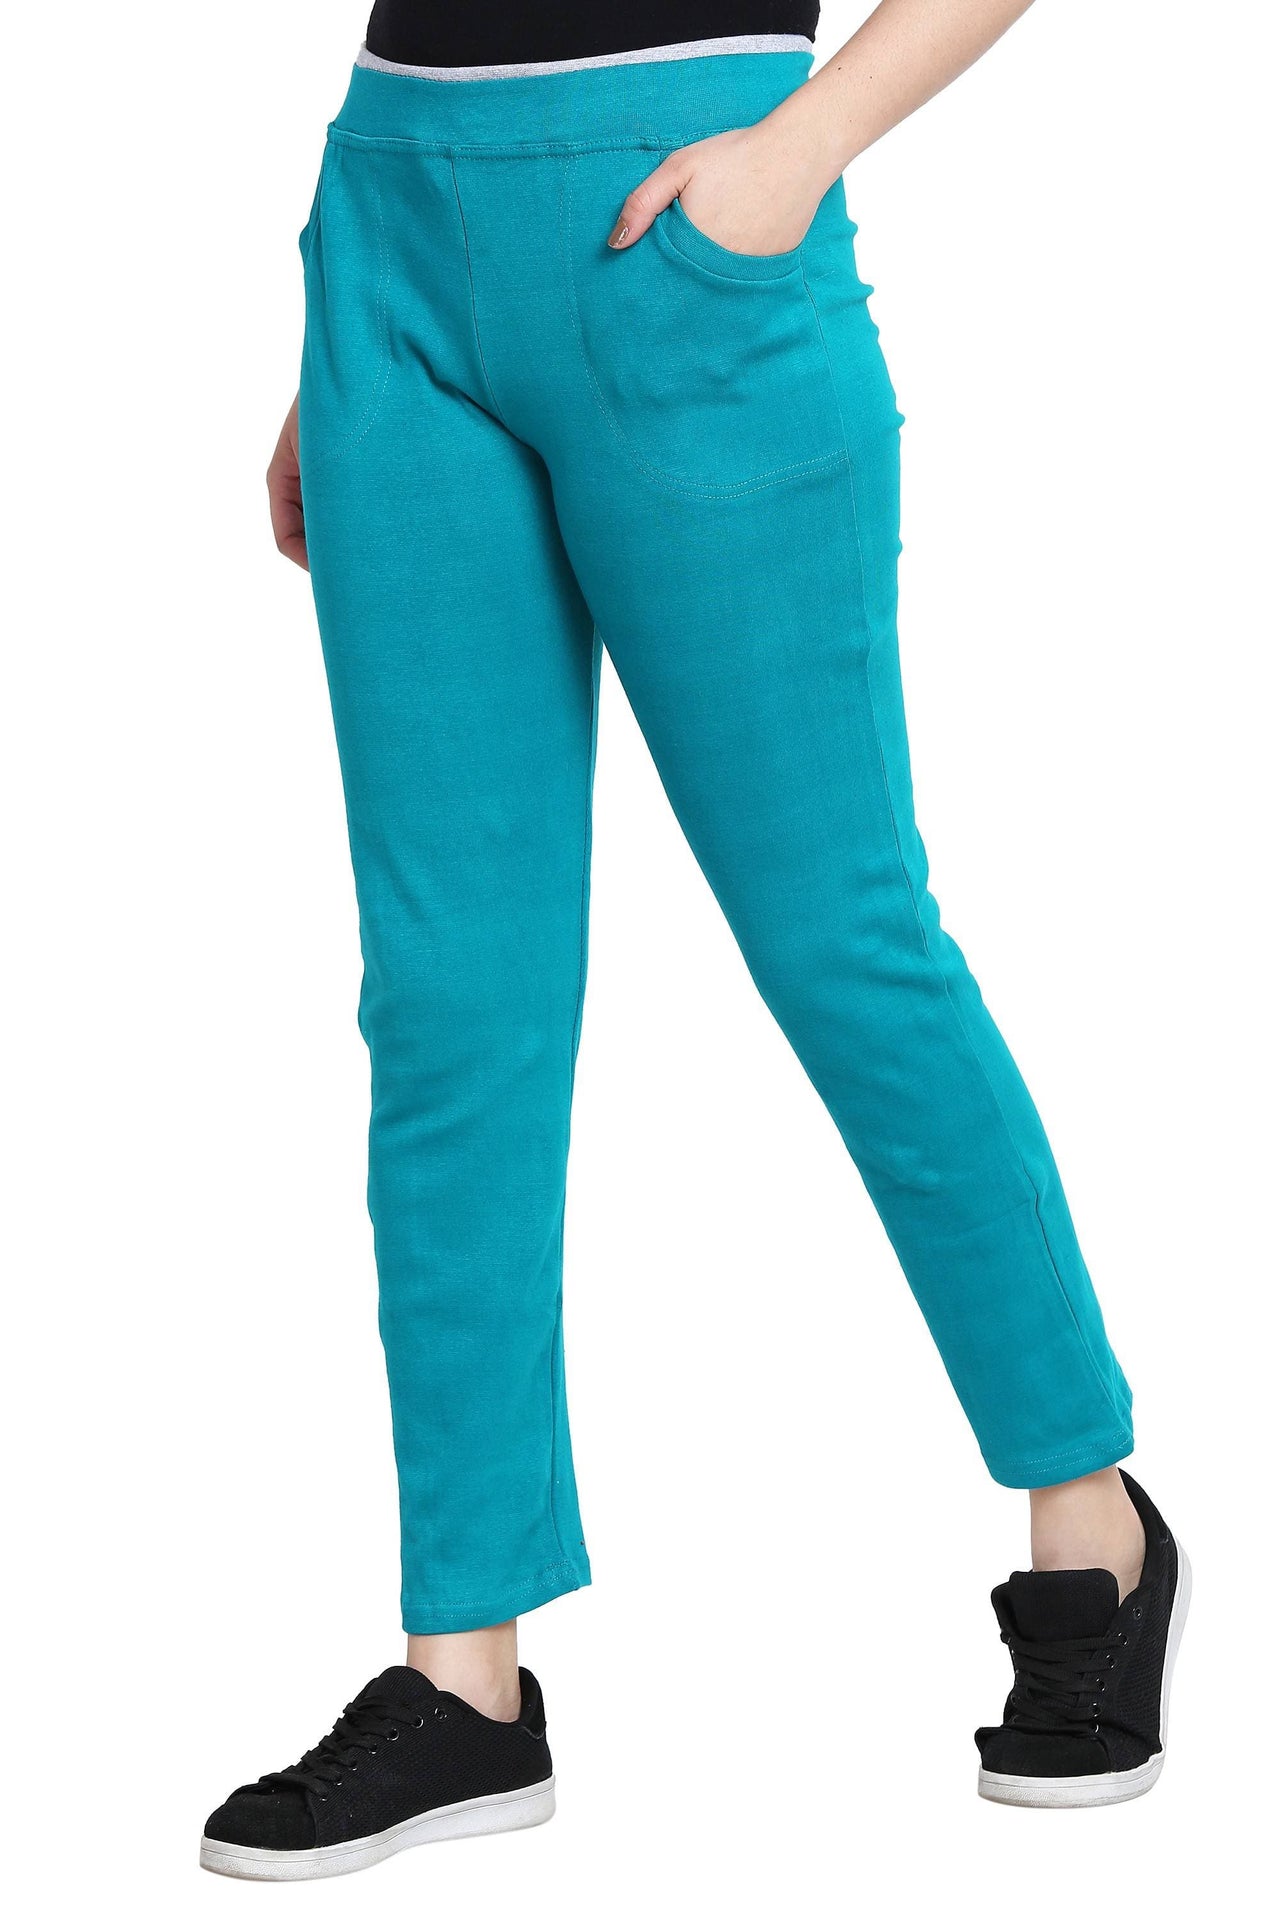 Asmaani Turquoise color Hosiery Lower with Two Side Pockets.